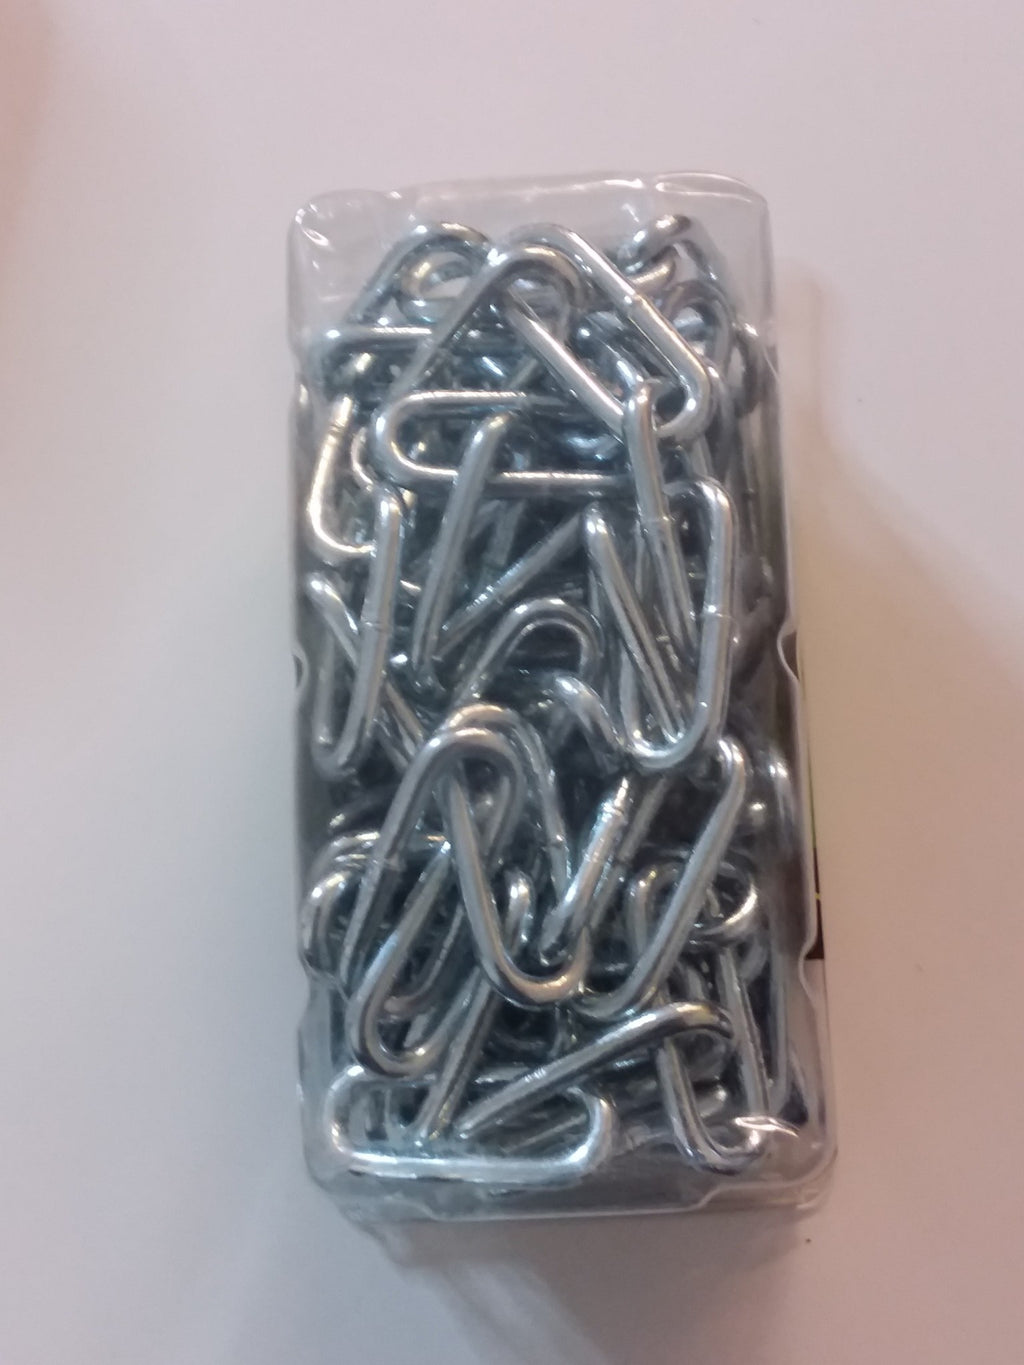 Straight Link Coil Chain No.2